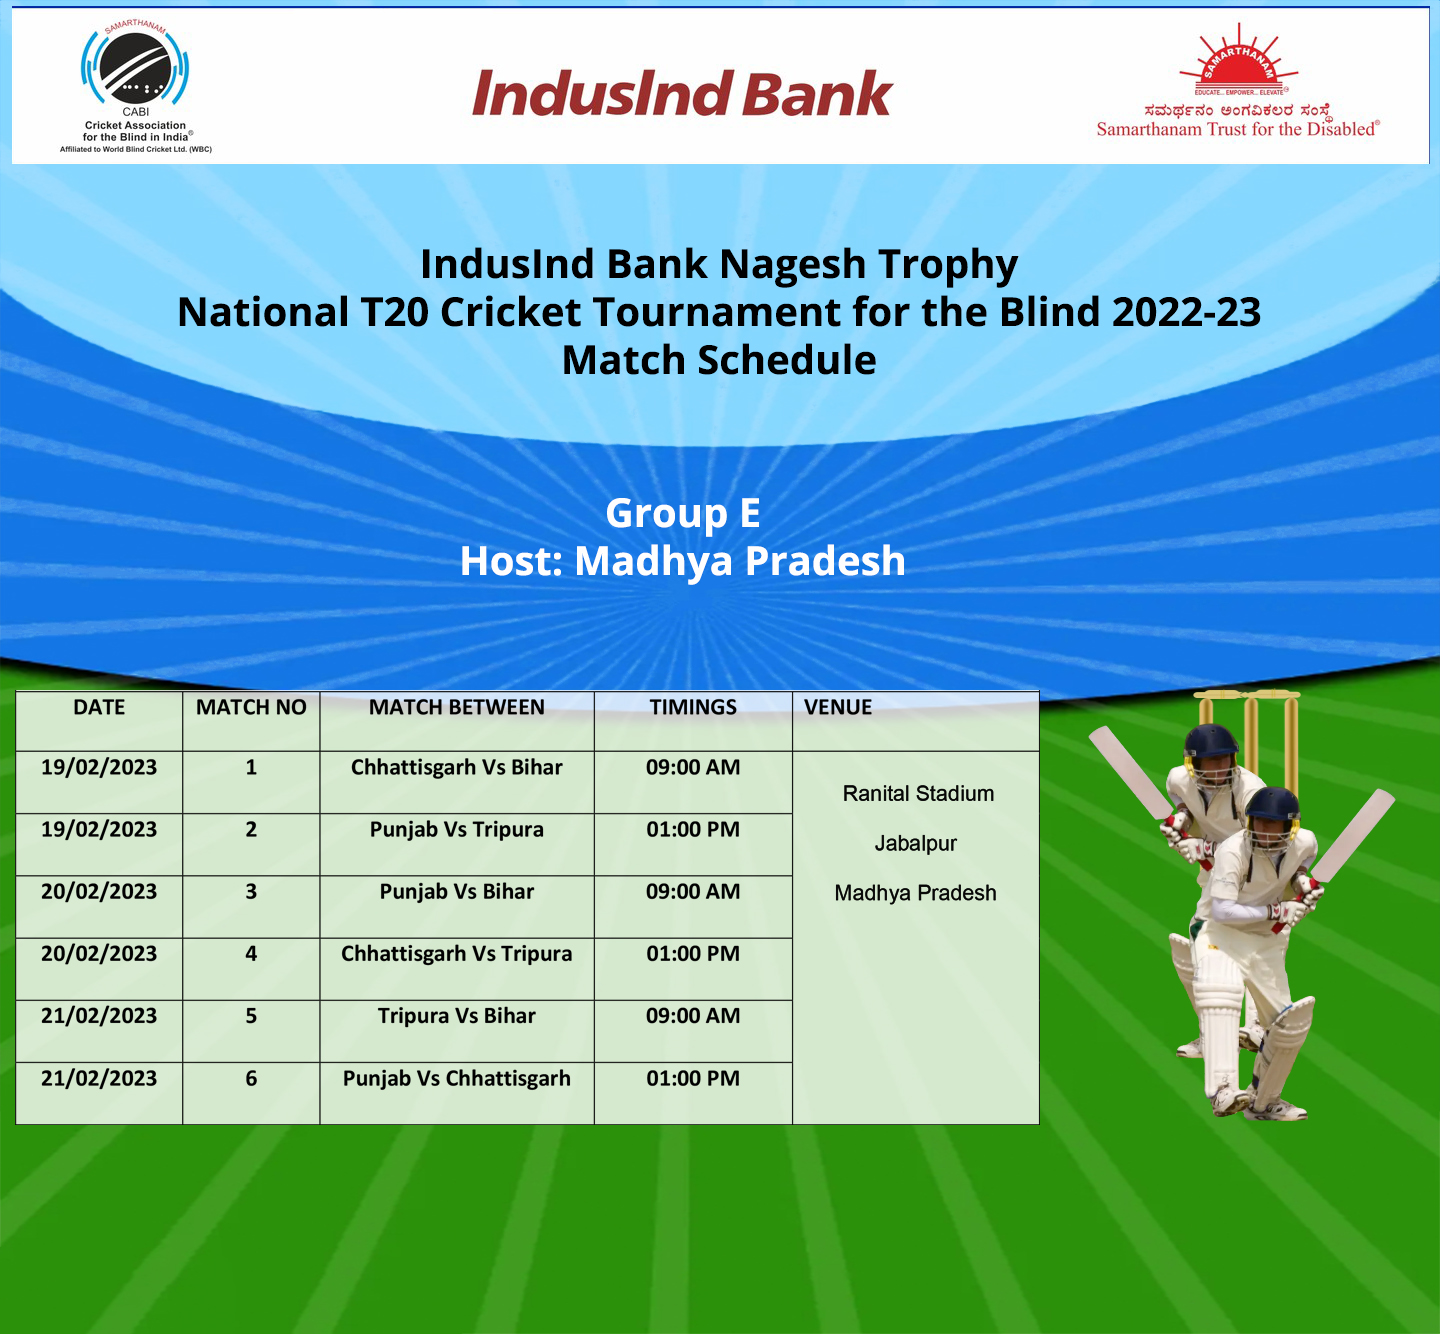 Match Schedule for Group E of IndusInd Bank Nagesh Trophy National T20 Cricket Tournament for the Blind 2022 – 2023